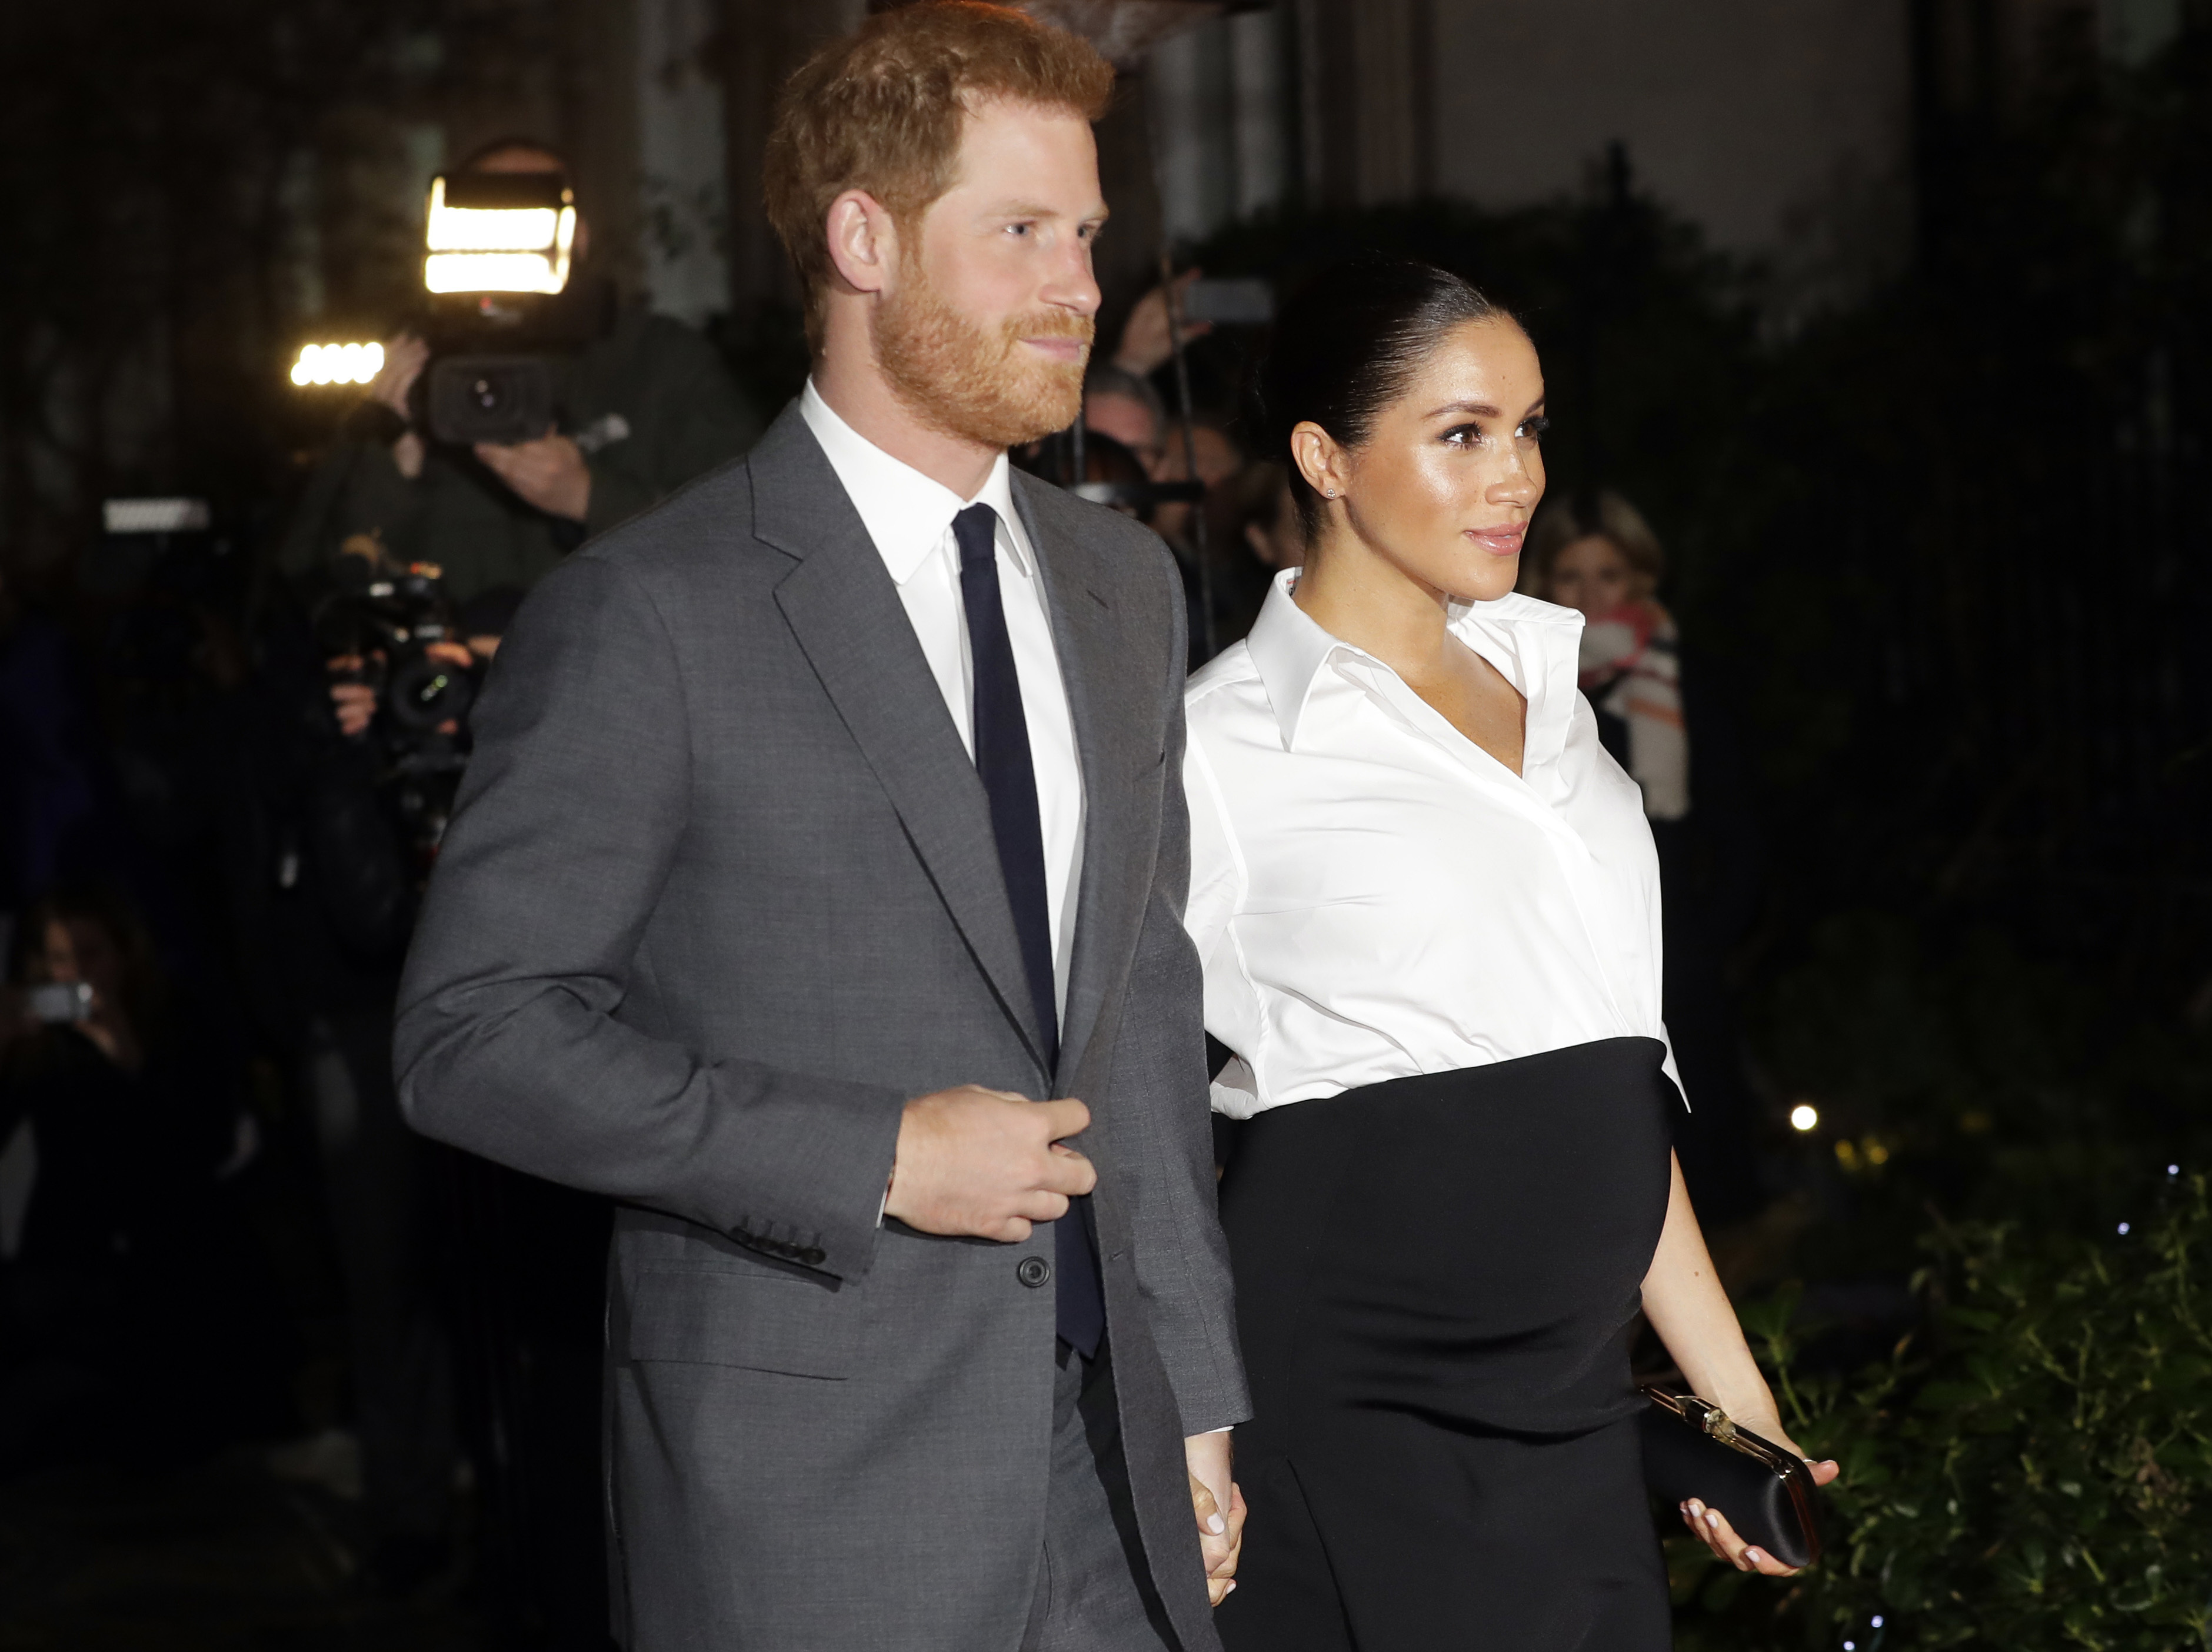 Harry and Meghan: Newest royal baby could be an American